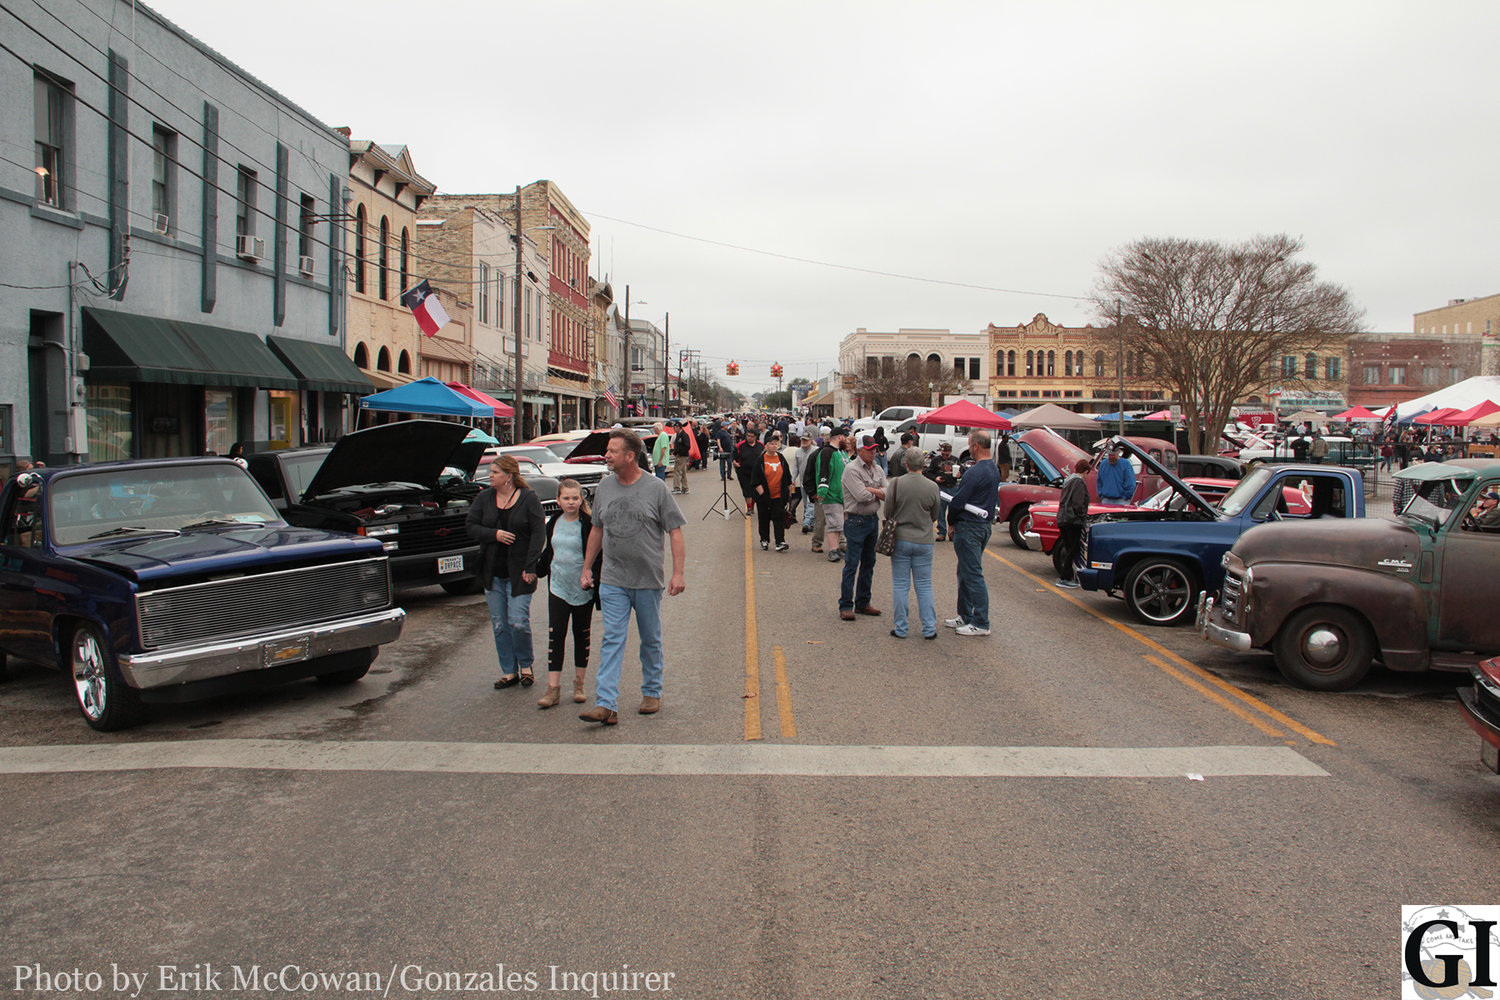 Though the expected number of cars and spectators were off by initial predictions, those that attended the Hot Rods and Hatters Car Show downtown on Saturday were treated to some sweet rides, live music, and various vendors.